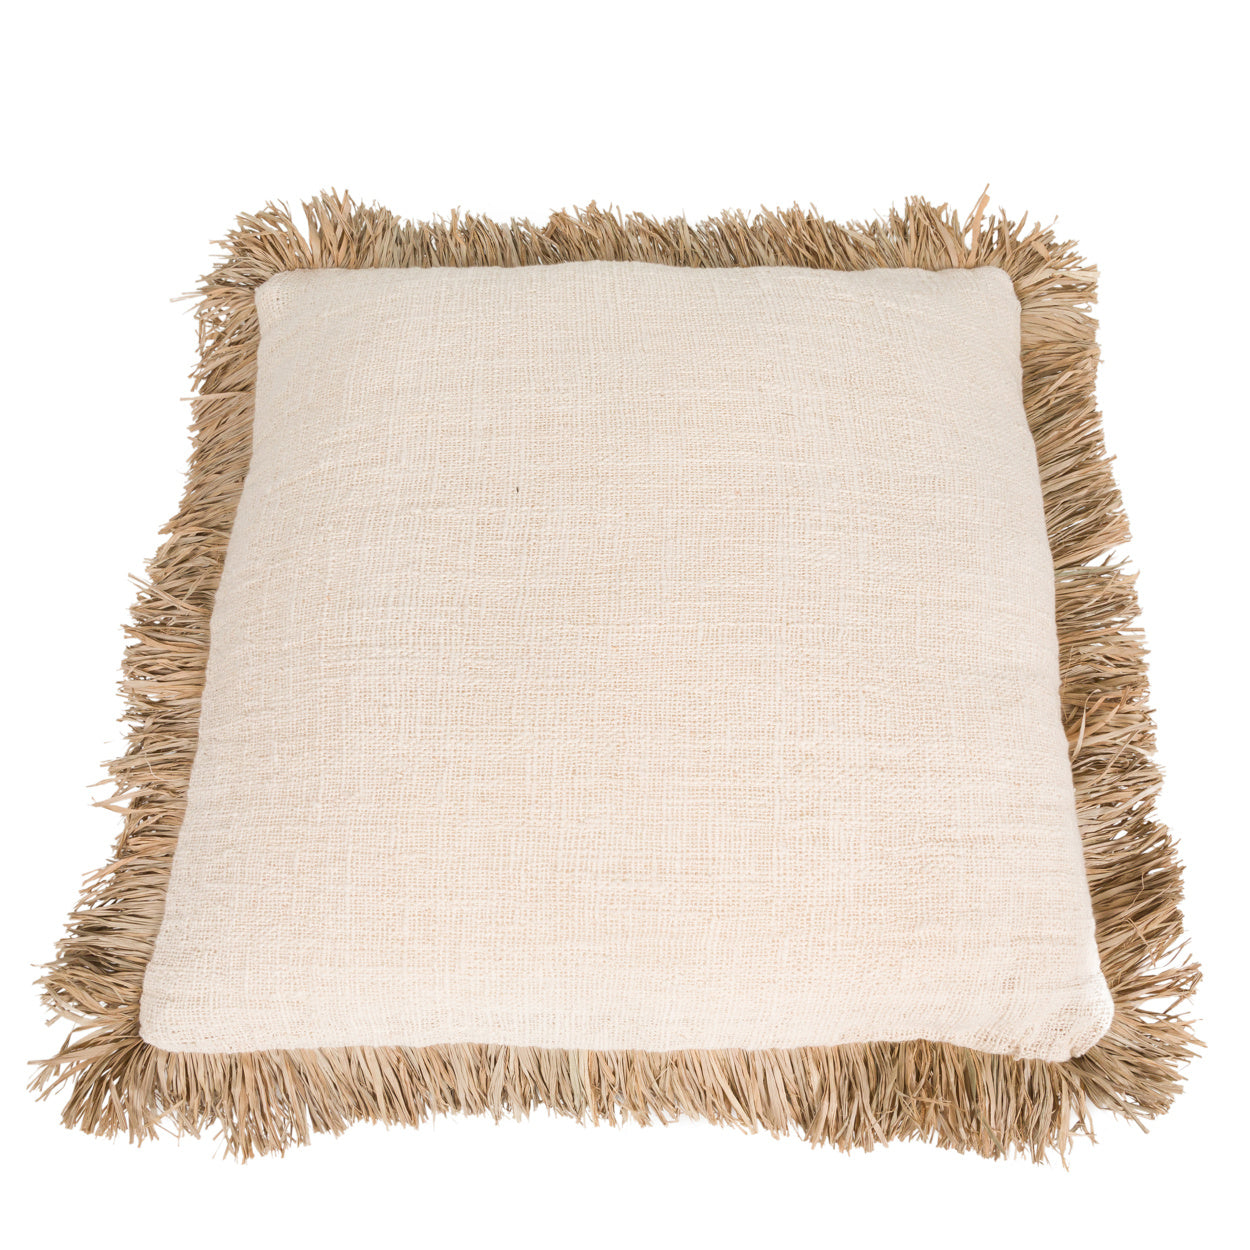 THE SAINT TROPEZ Cushion Cover Natural-White front view